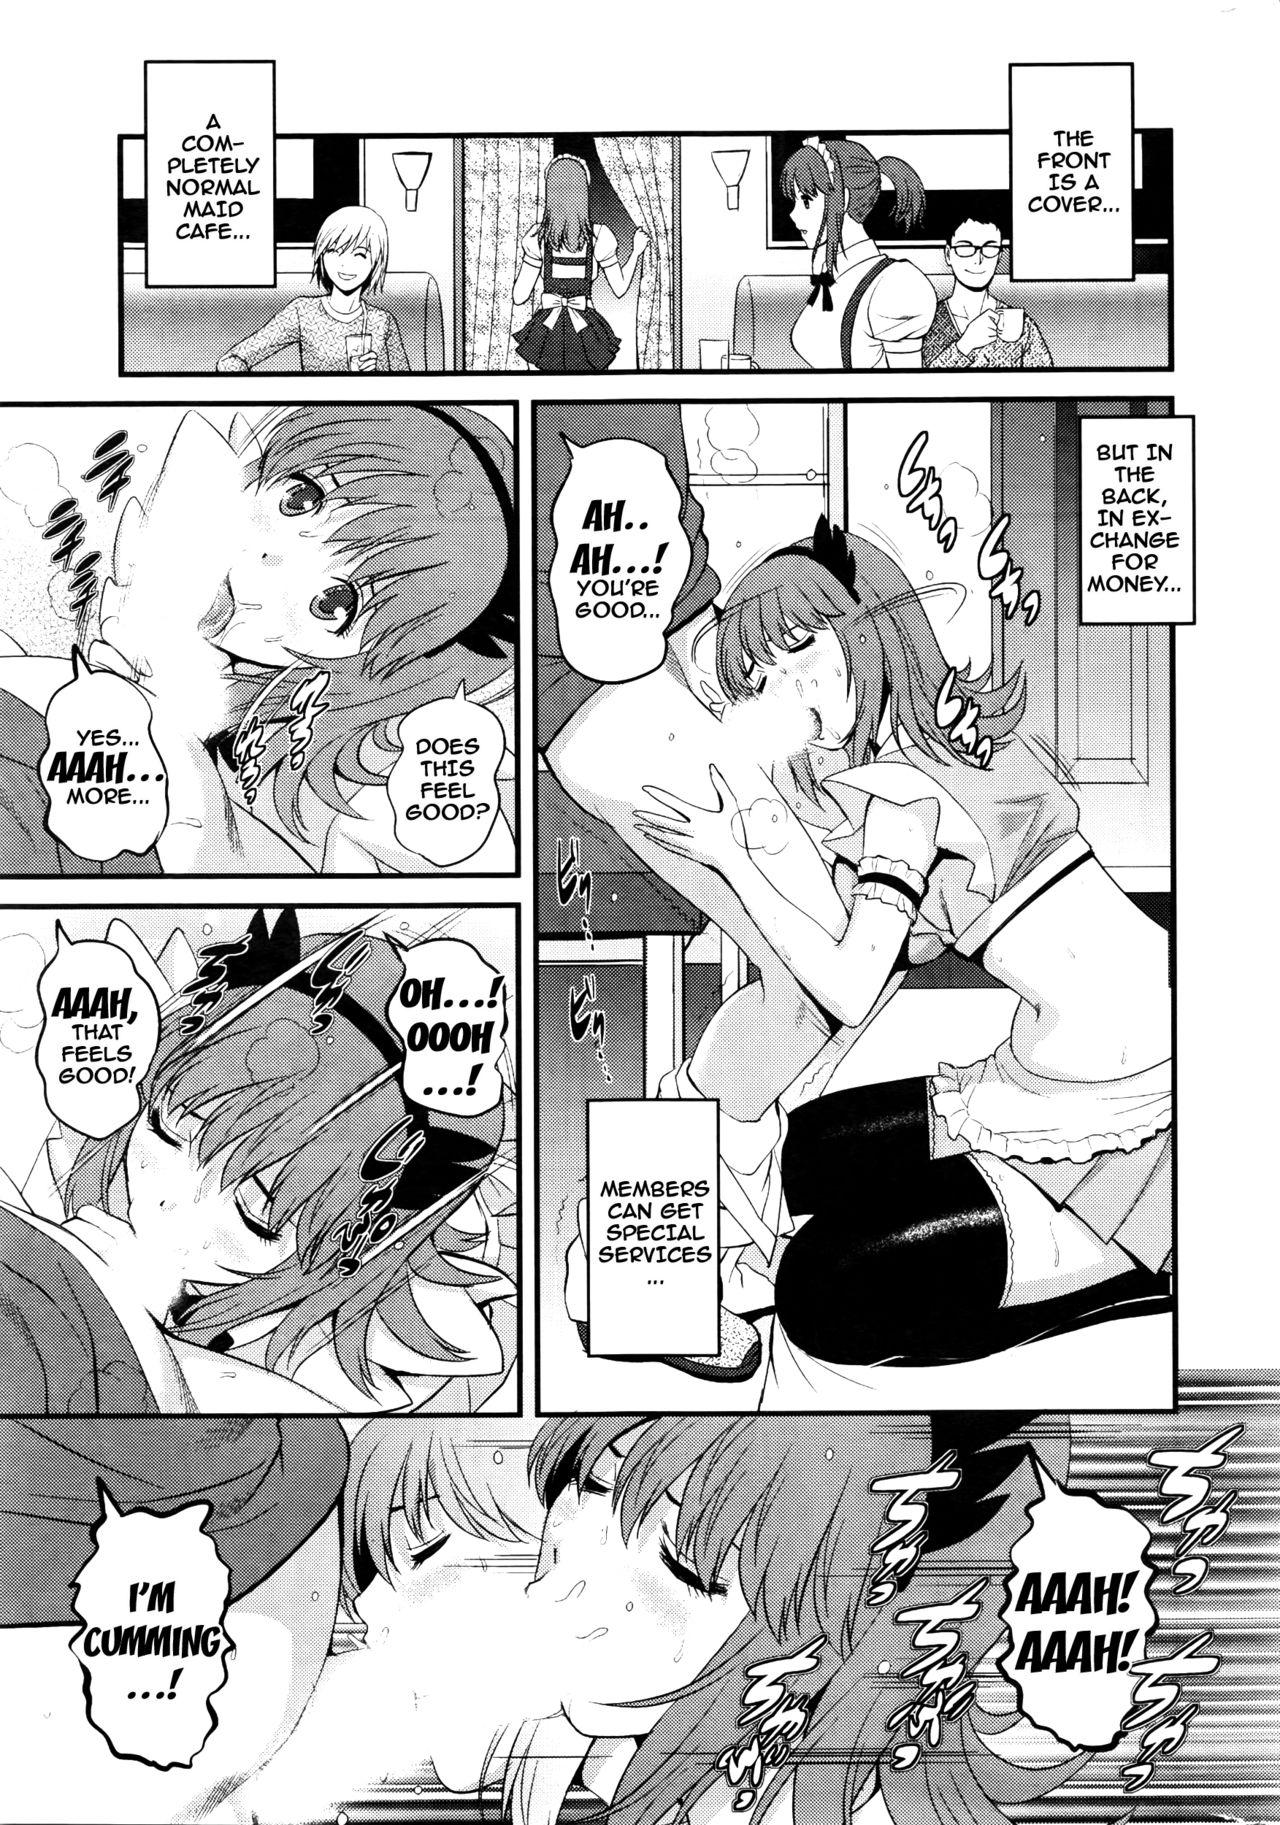 Chunky [Saigado] Part Time Manaka-san 2nd Ch. 1-5 [English] {doujins.com} [Incomplete] Private - Page 8